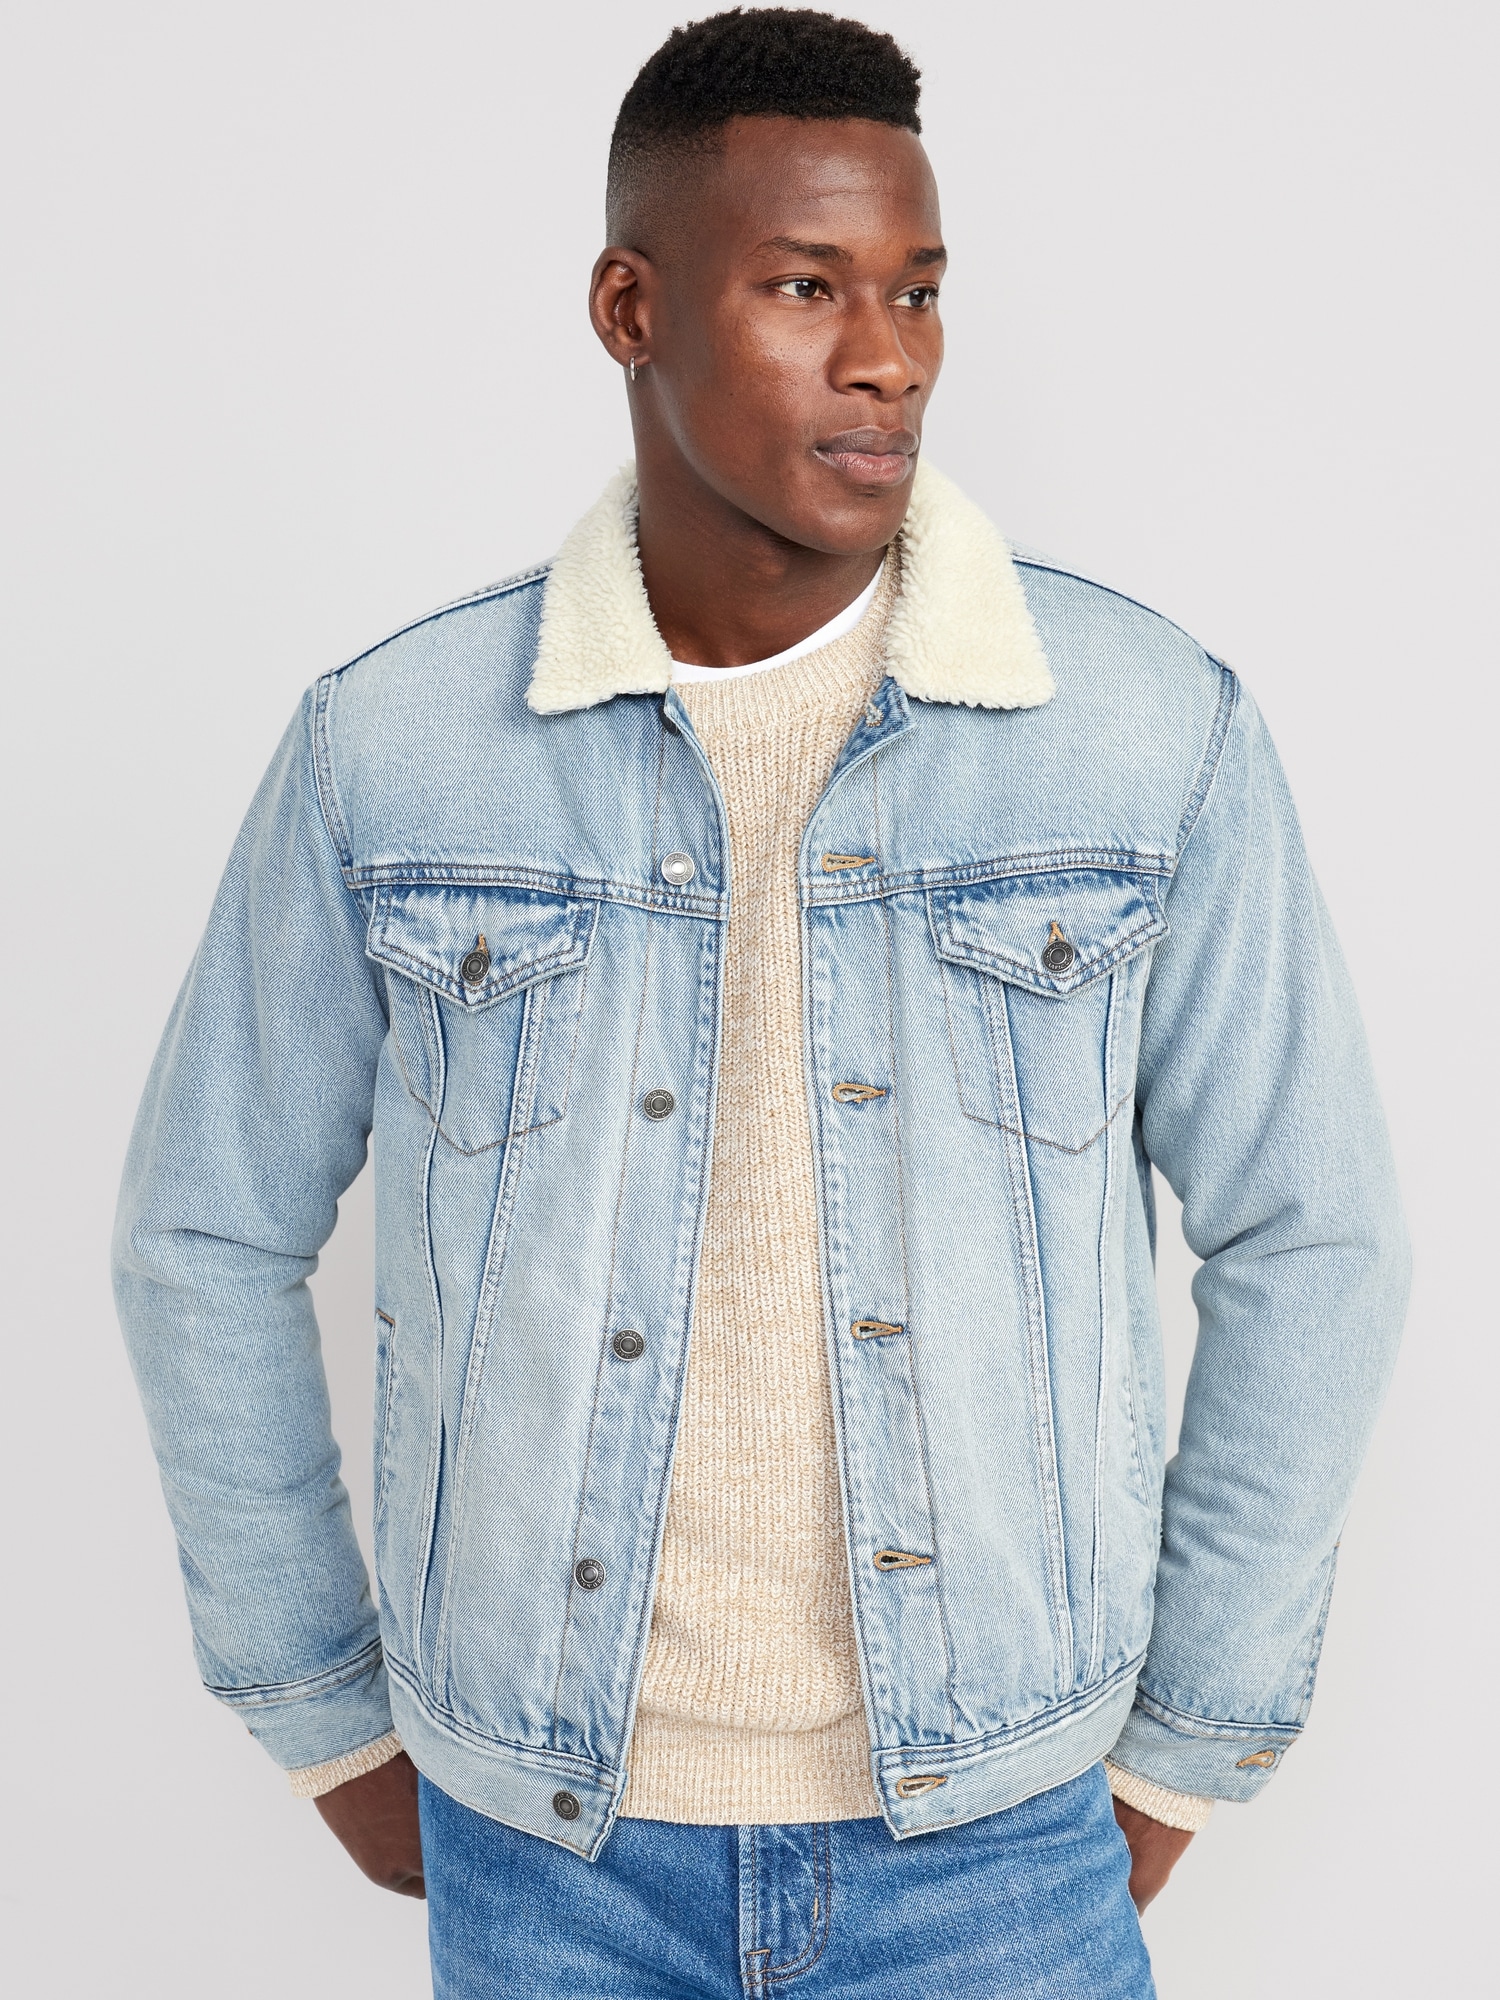 Men's Winter Style: Black Parka Jacket With Fur And Light Blue Jeans  Combines With Steel Accessories | MEN'S VECTOR